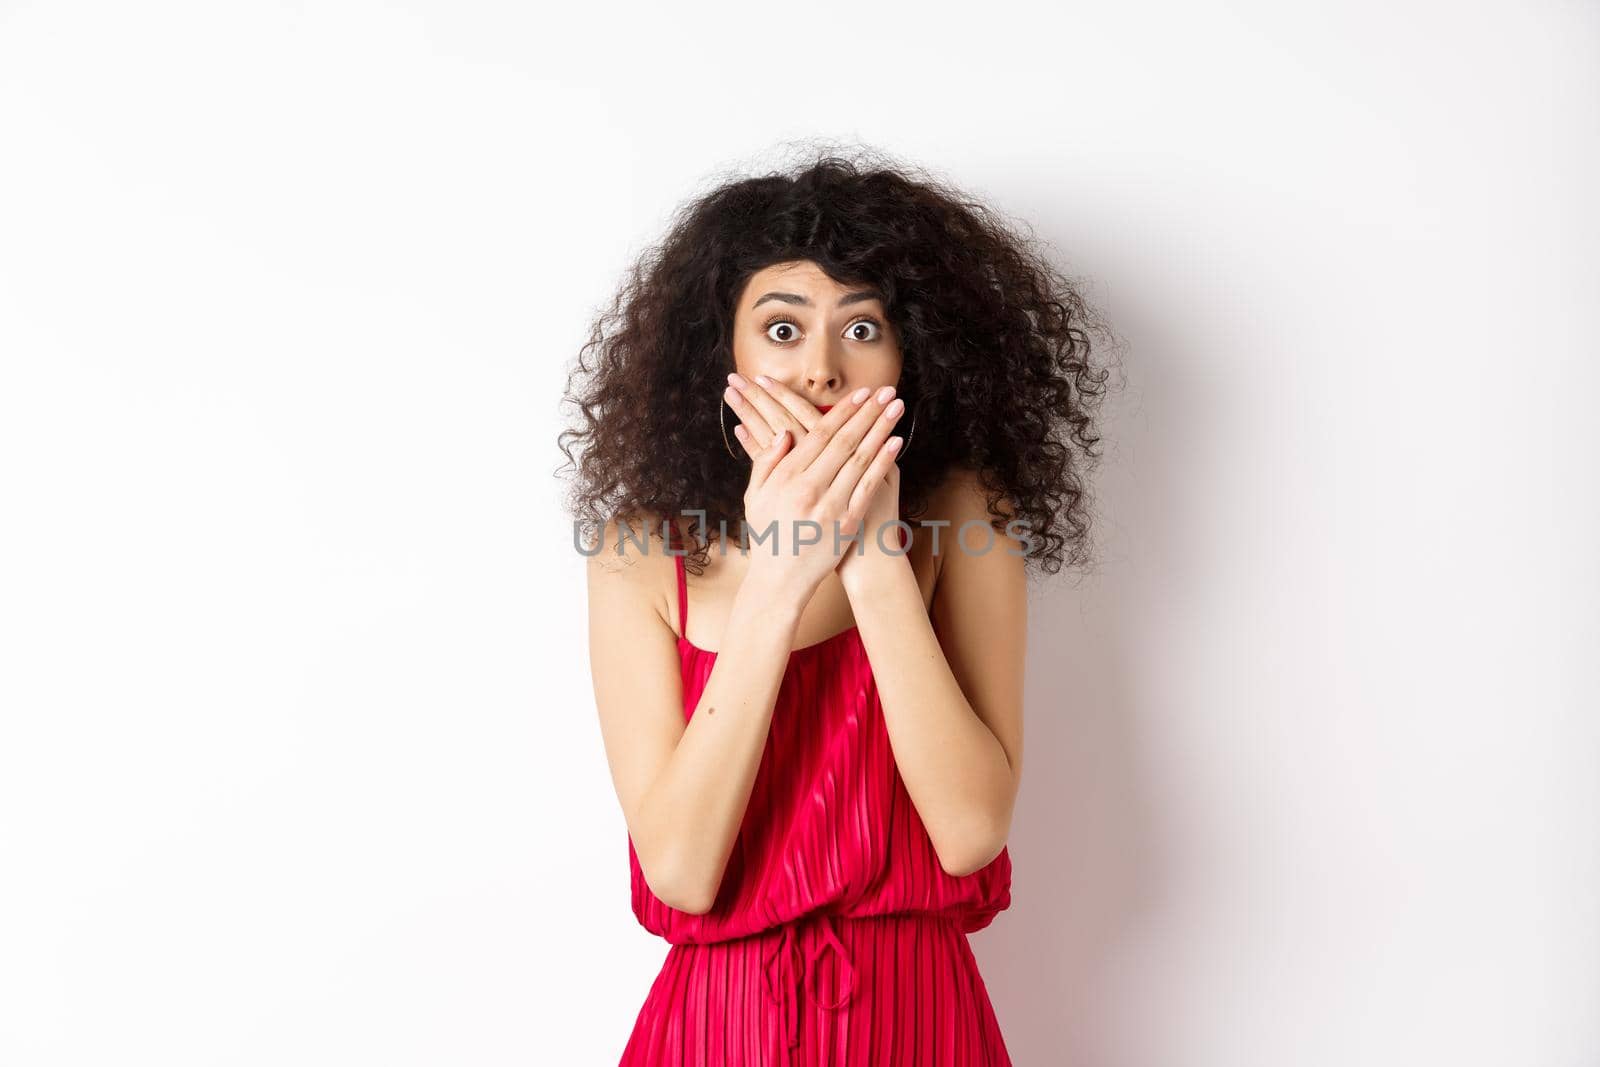 Shocked woman covering mouth with hands and staring with disbelief at camera, witness something shocking, standing in red dress on white background.